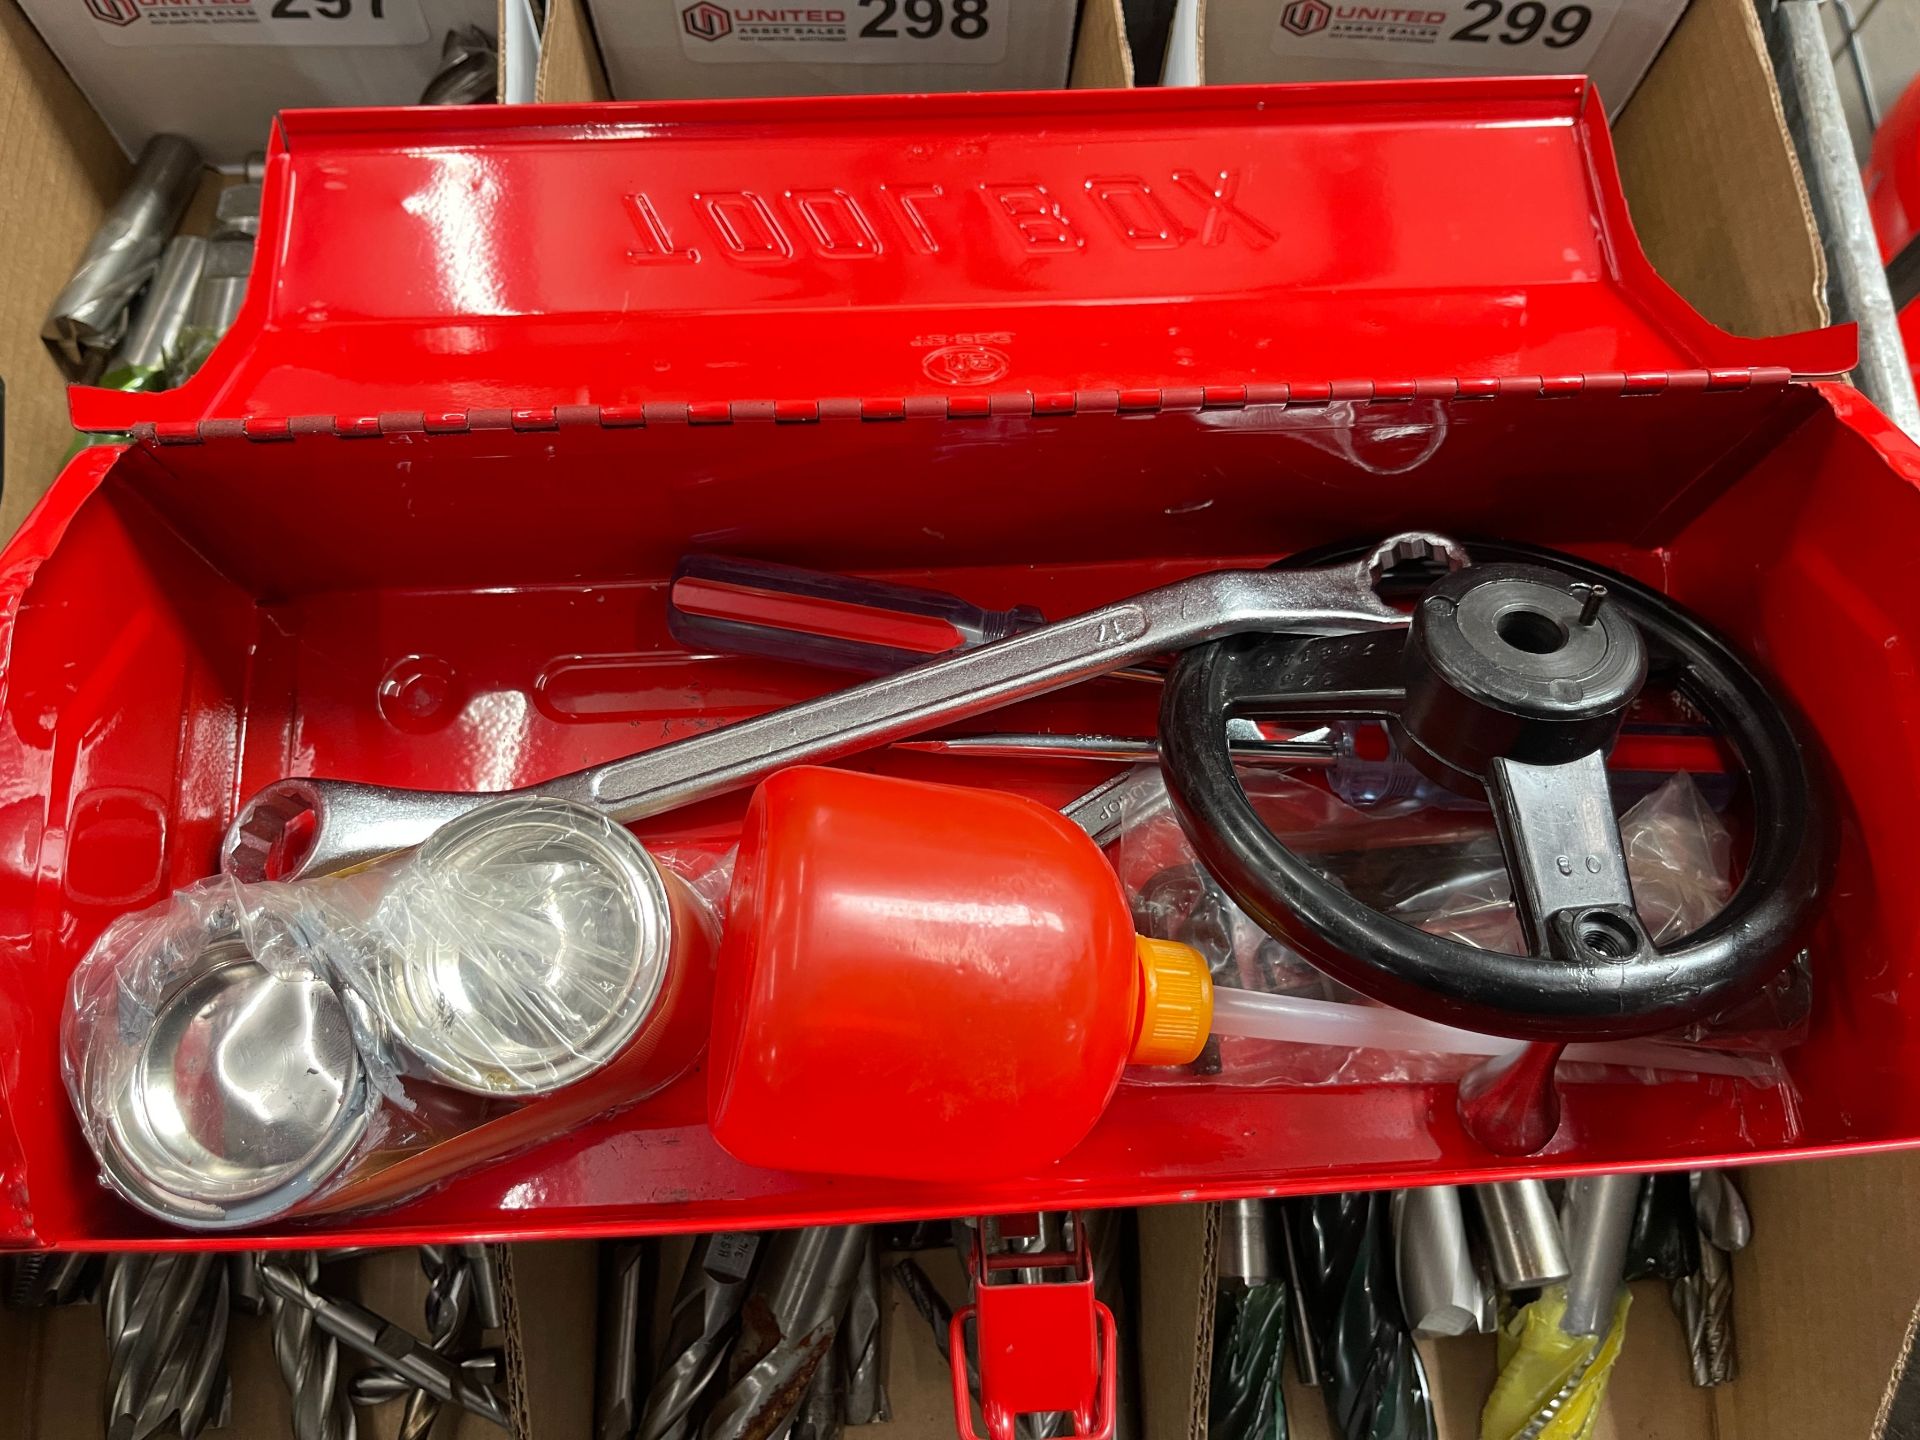 RED TOOL BOX, W/ CONTENTS OF MISC. TOOLS